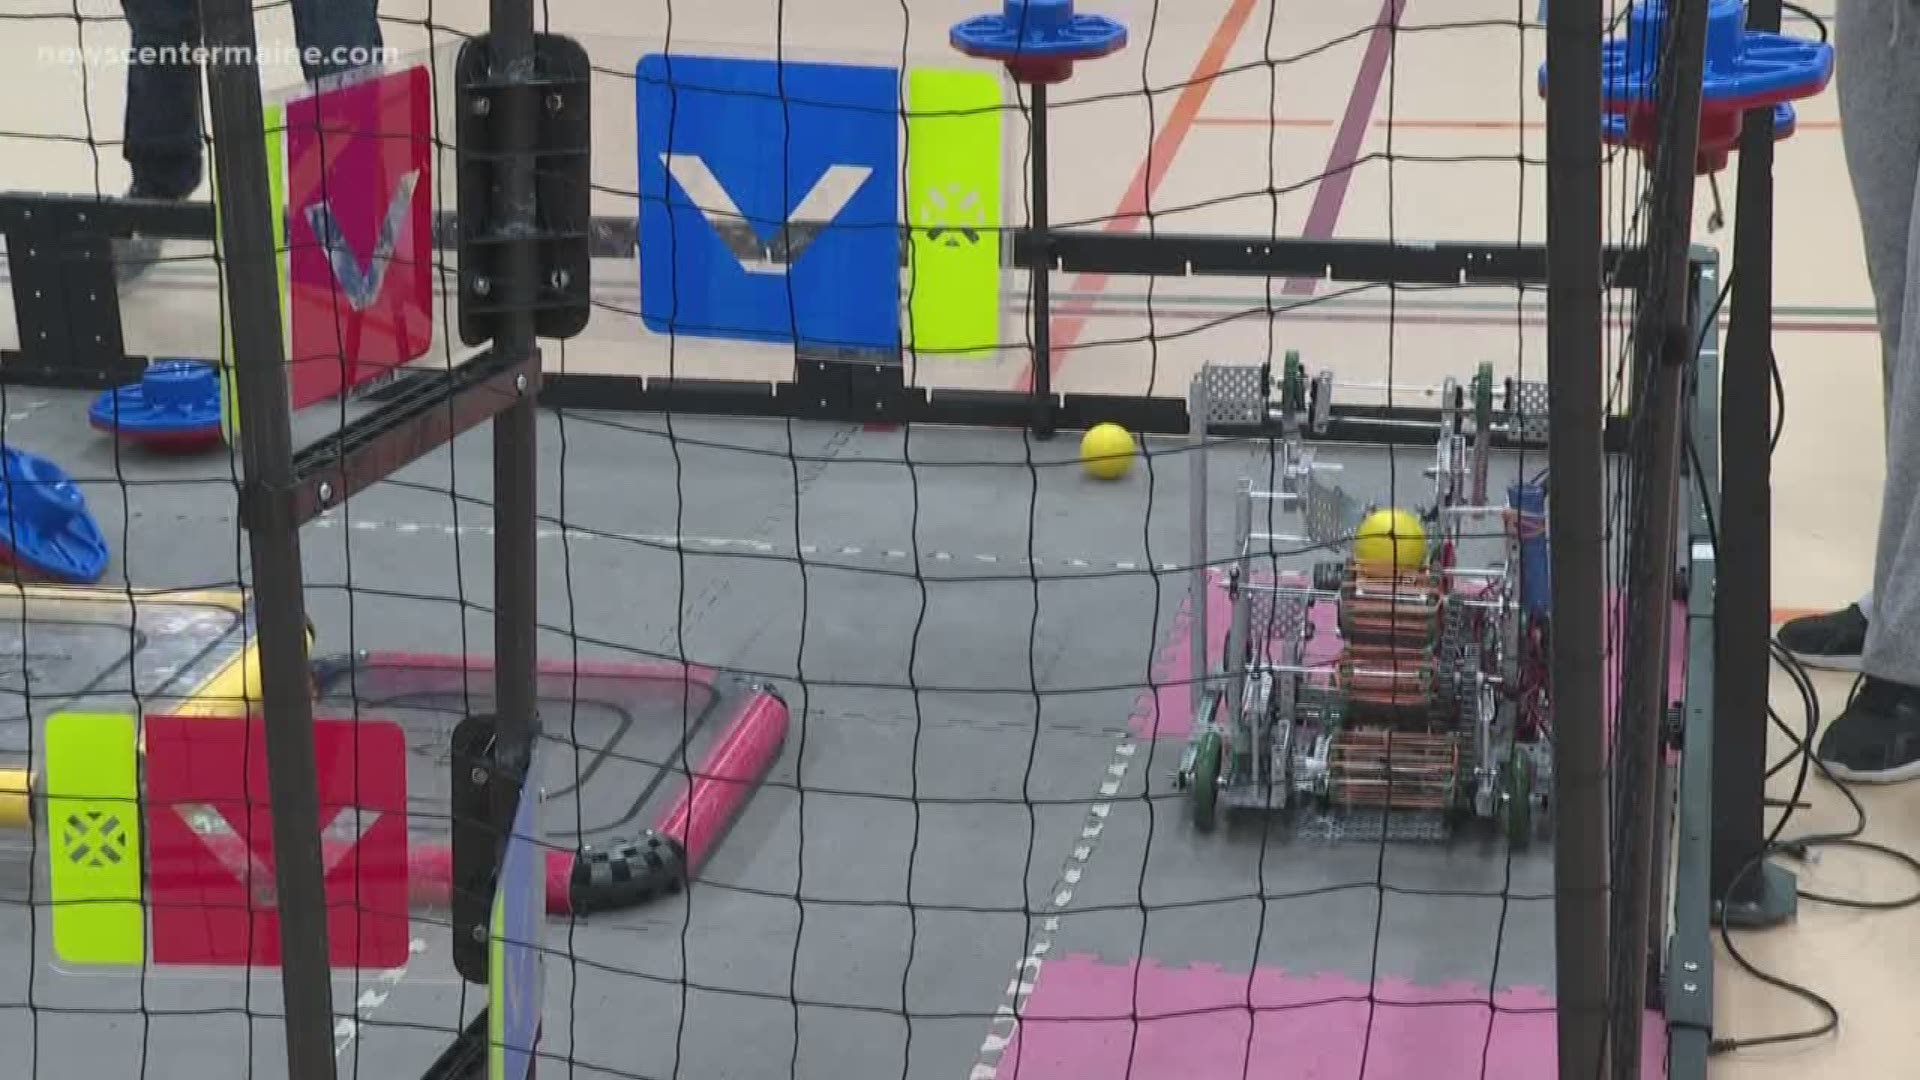 More than 250 students are competing in the VEX Robotics State Championships in South Portland.